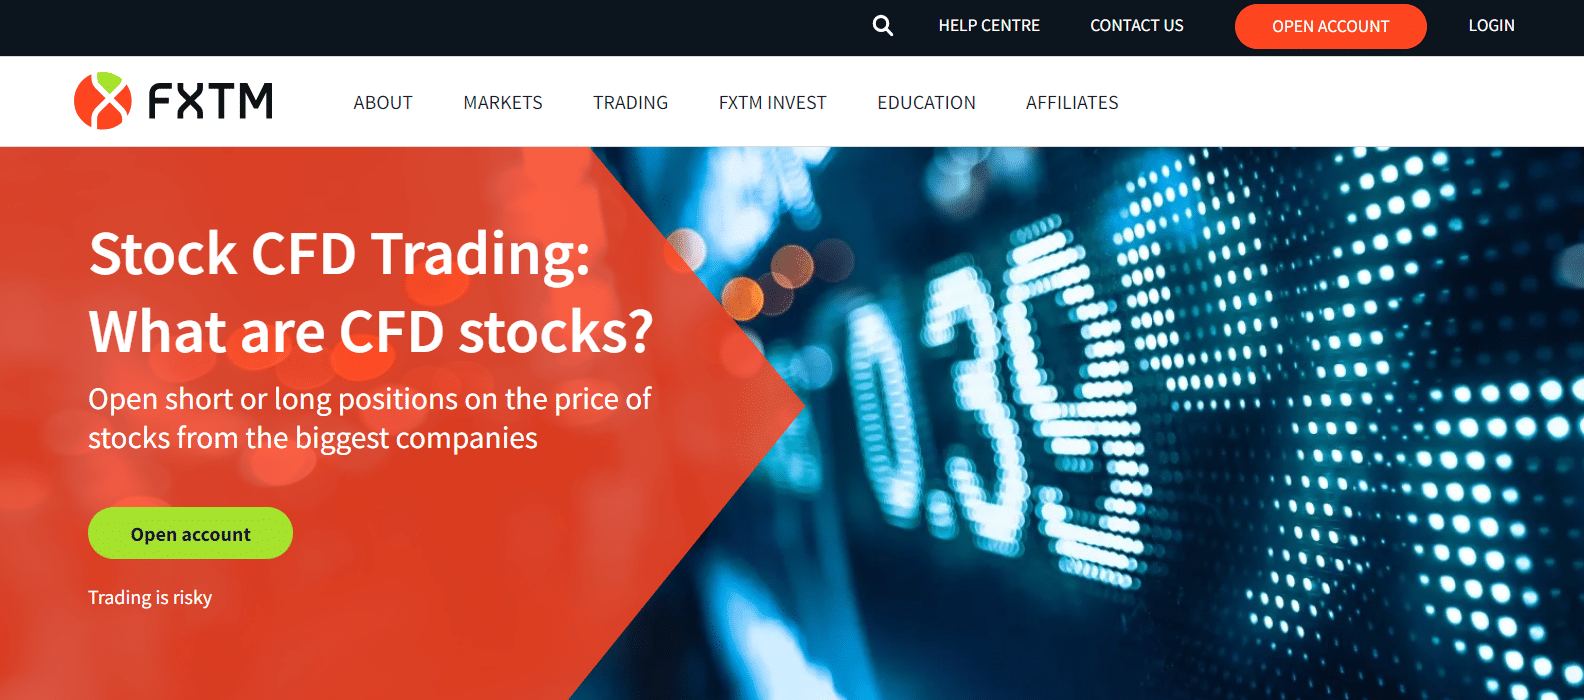 Pros and Cons of Trading with FXTM